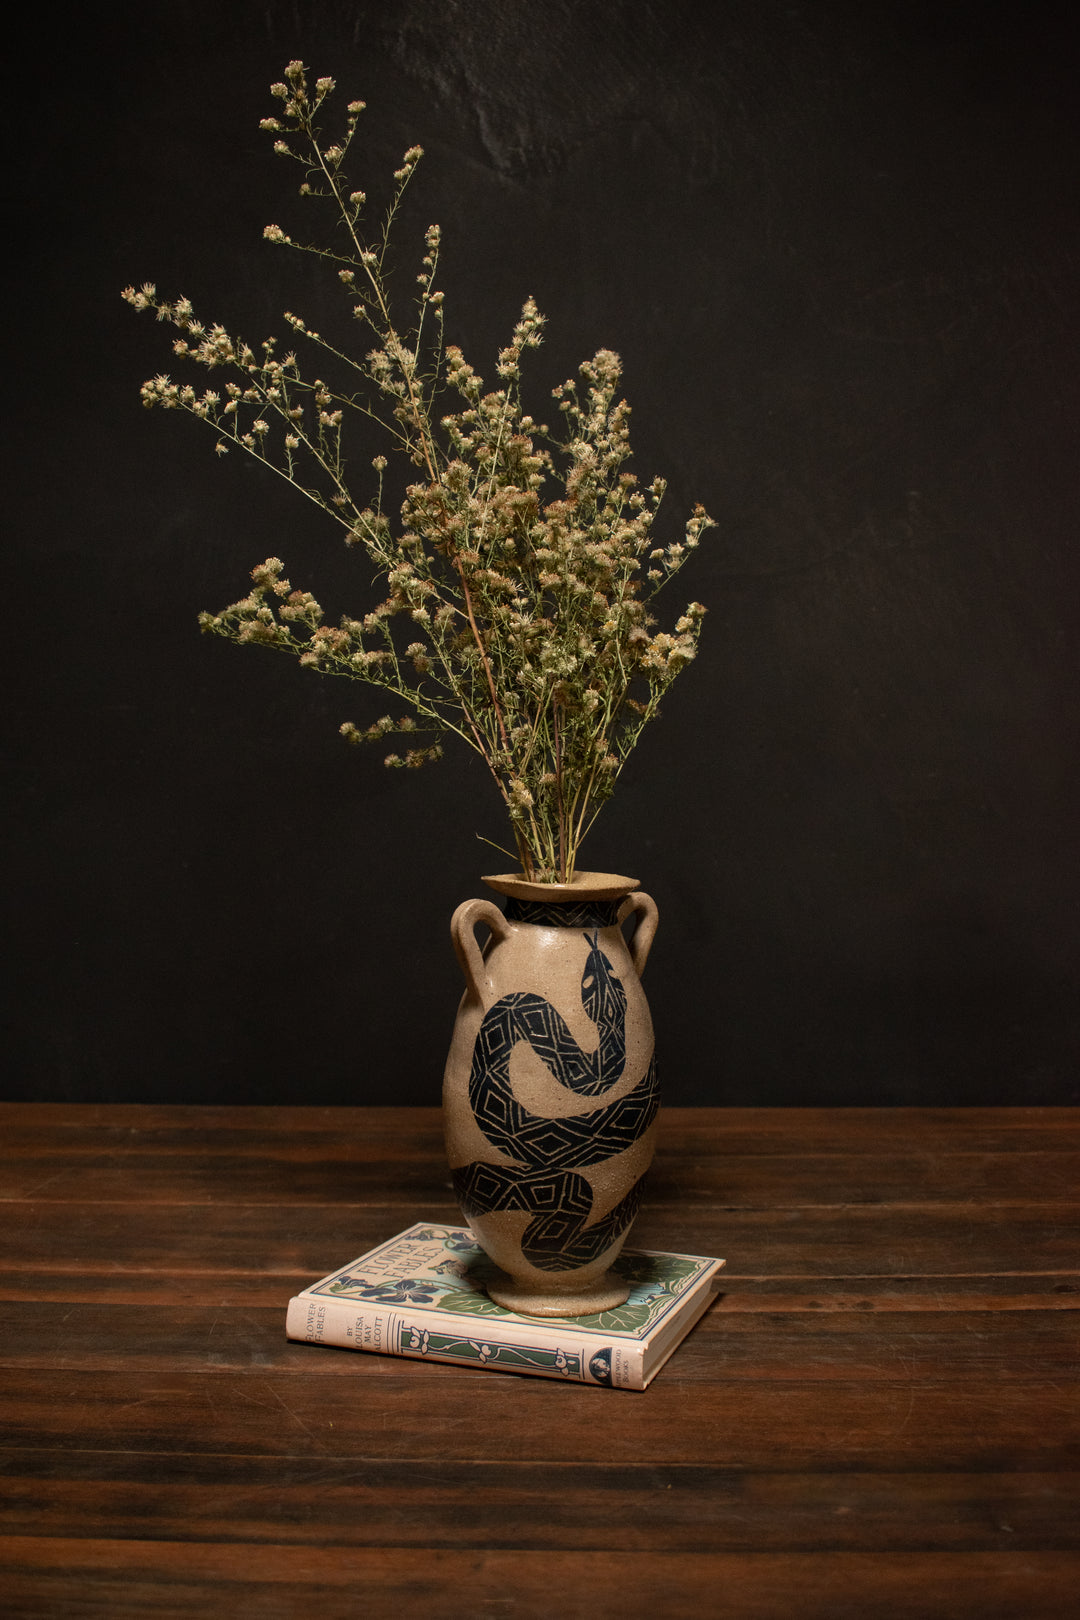 Serpent Urn With Dried Flowers sits on a vintage book in front of a black wall